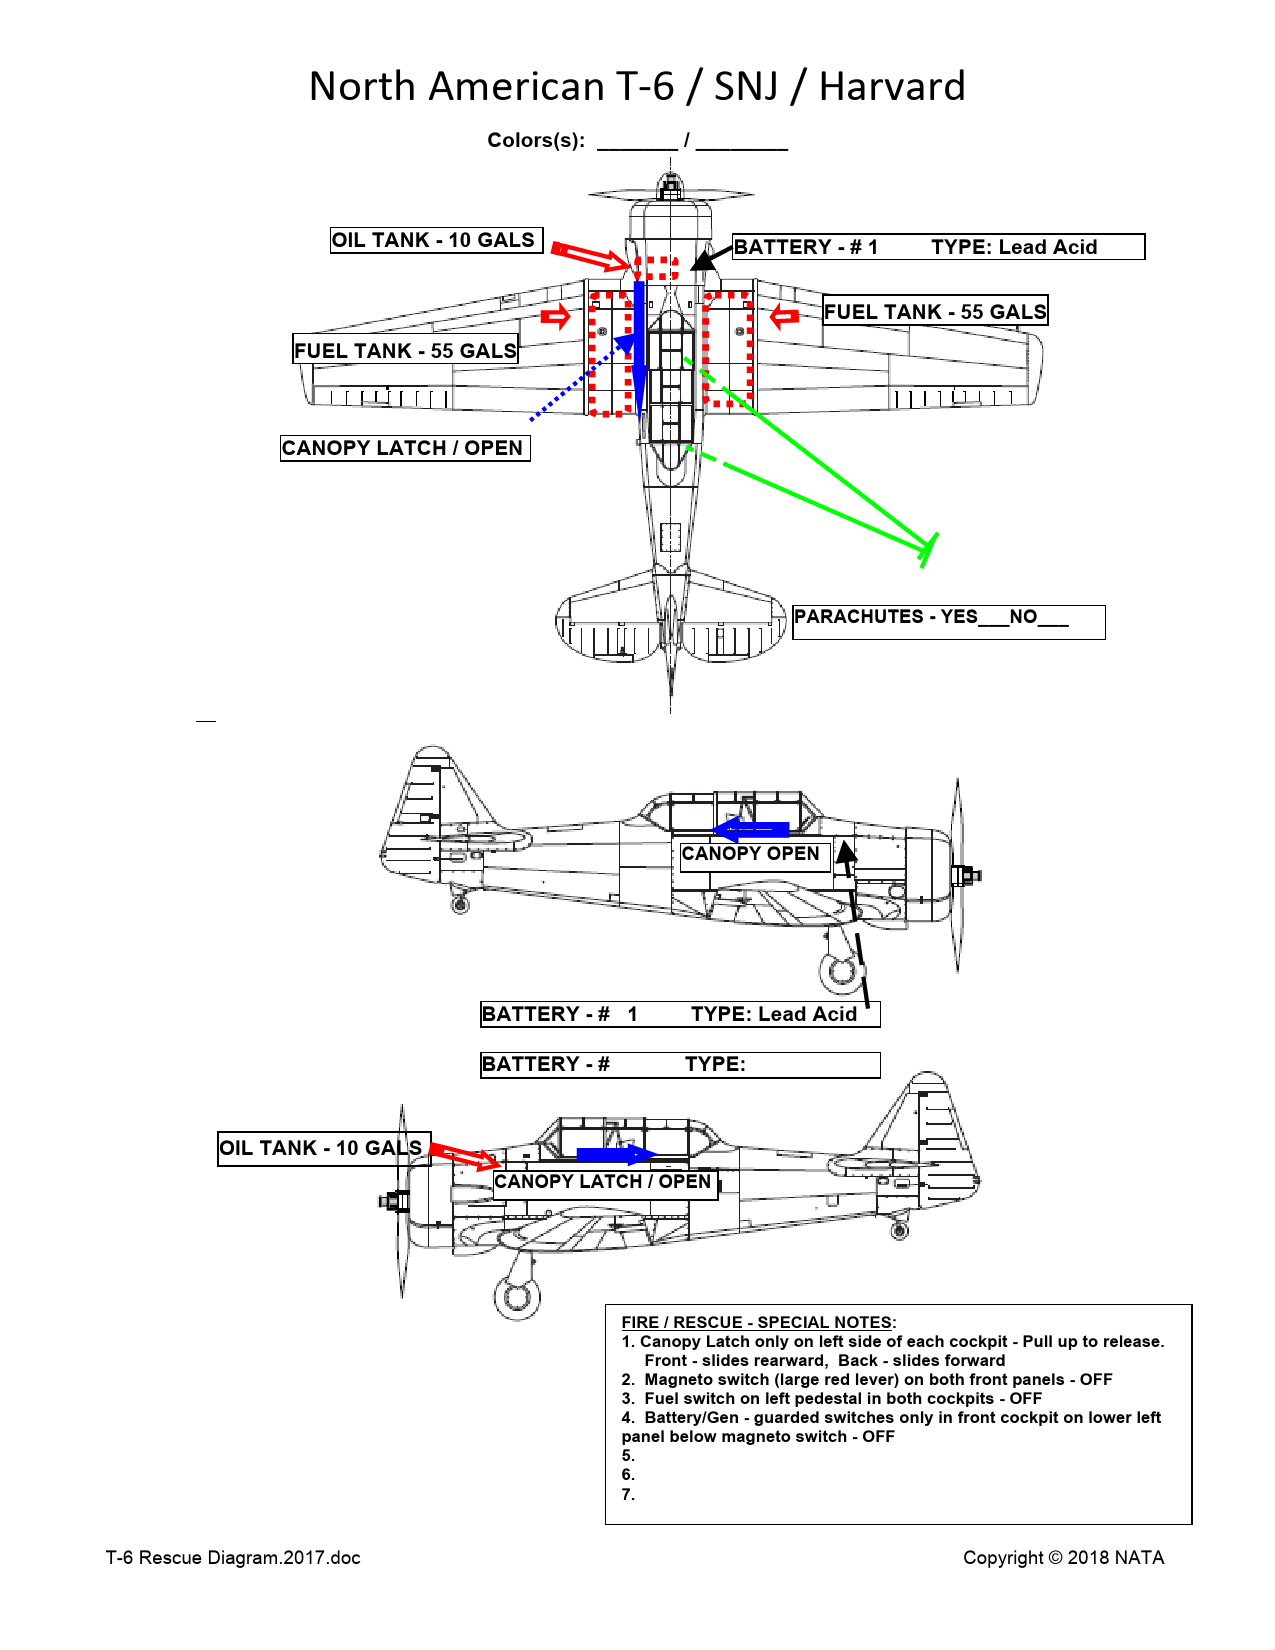 Sample page 1 from AirCorps Library document: T-6 /SNJ / Harvard Rescue Diagram